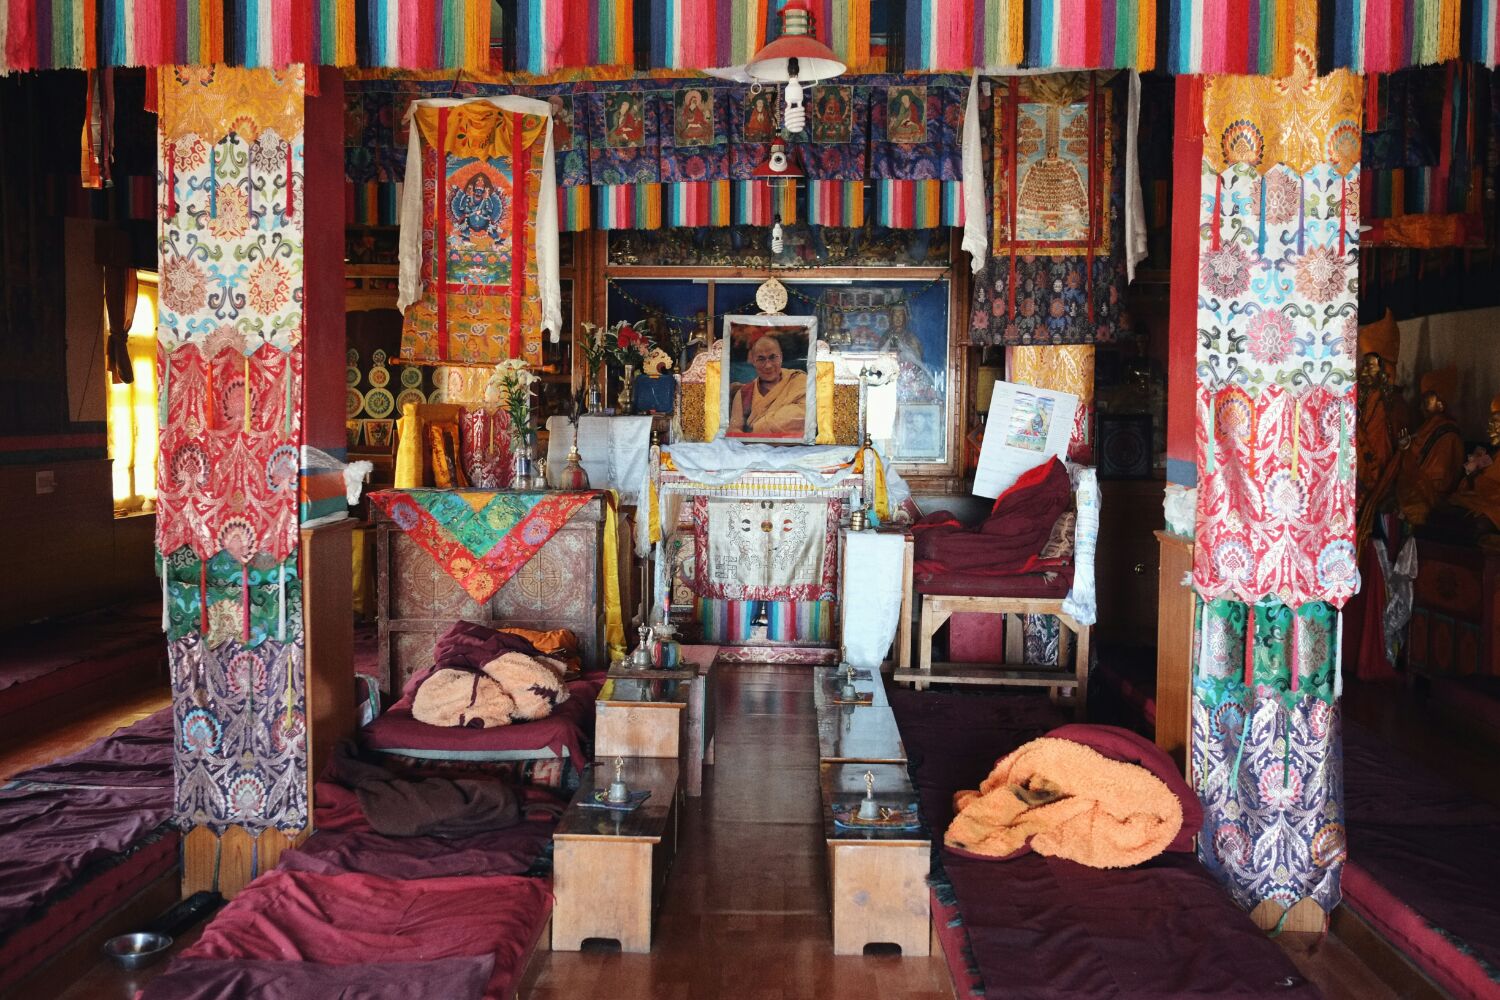 Ki Gompa. Every gompa has a room dedicated to the Dalai Lama. In many photographs are not permitted but here I was told I could take a photo. A picture doesn't really do the atmosphere justice at all.